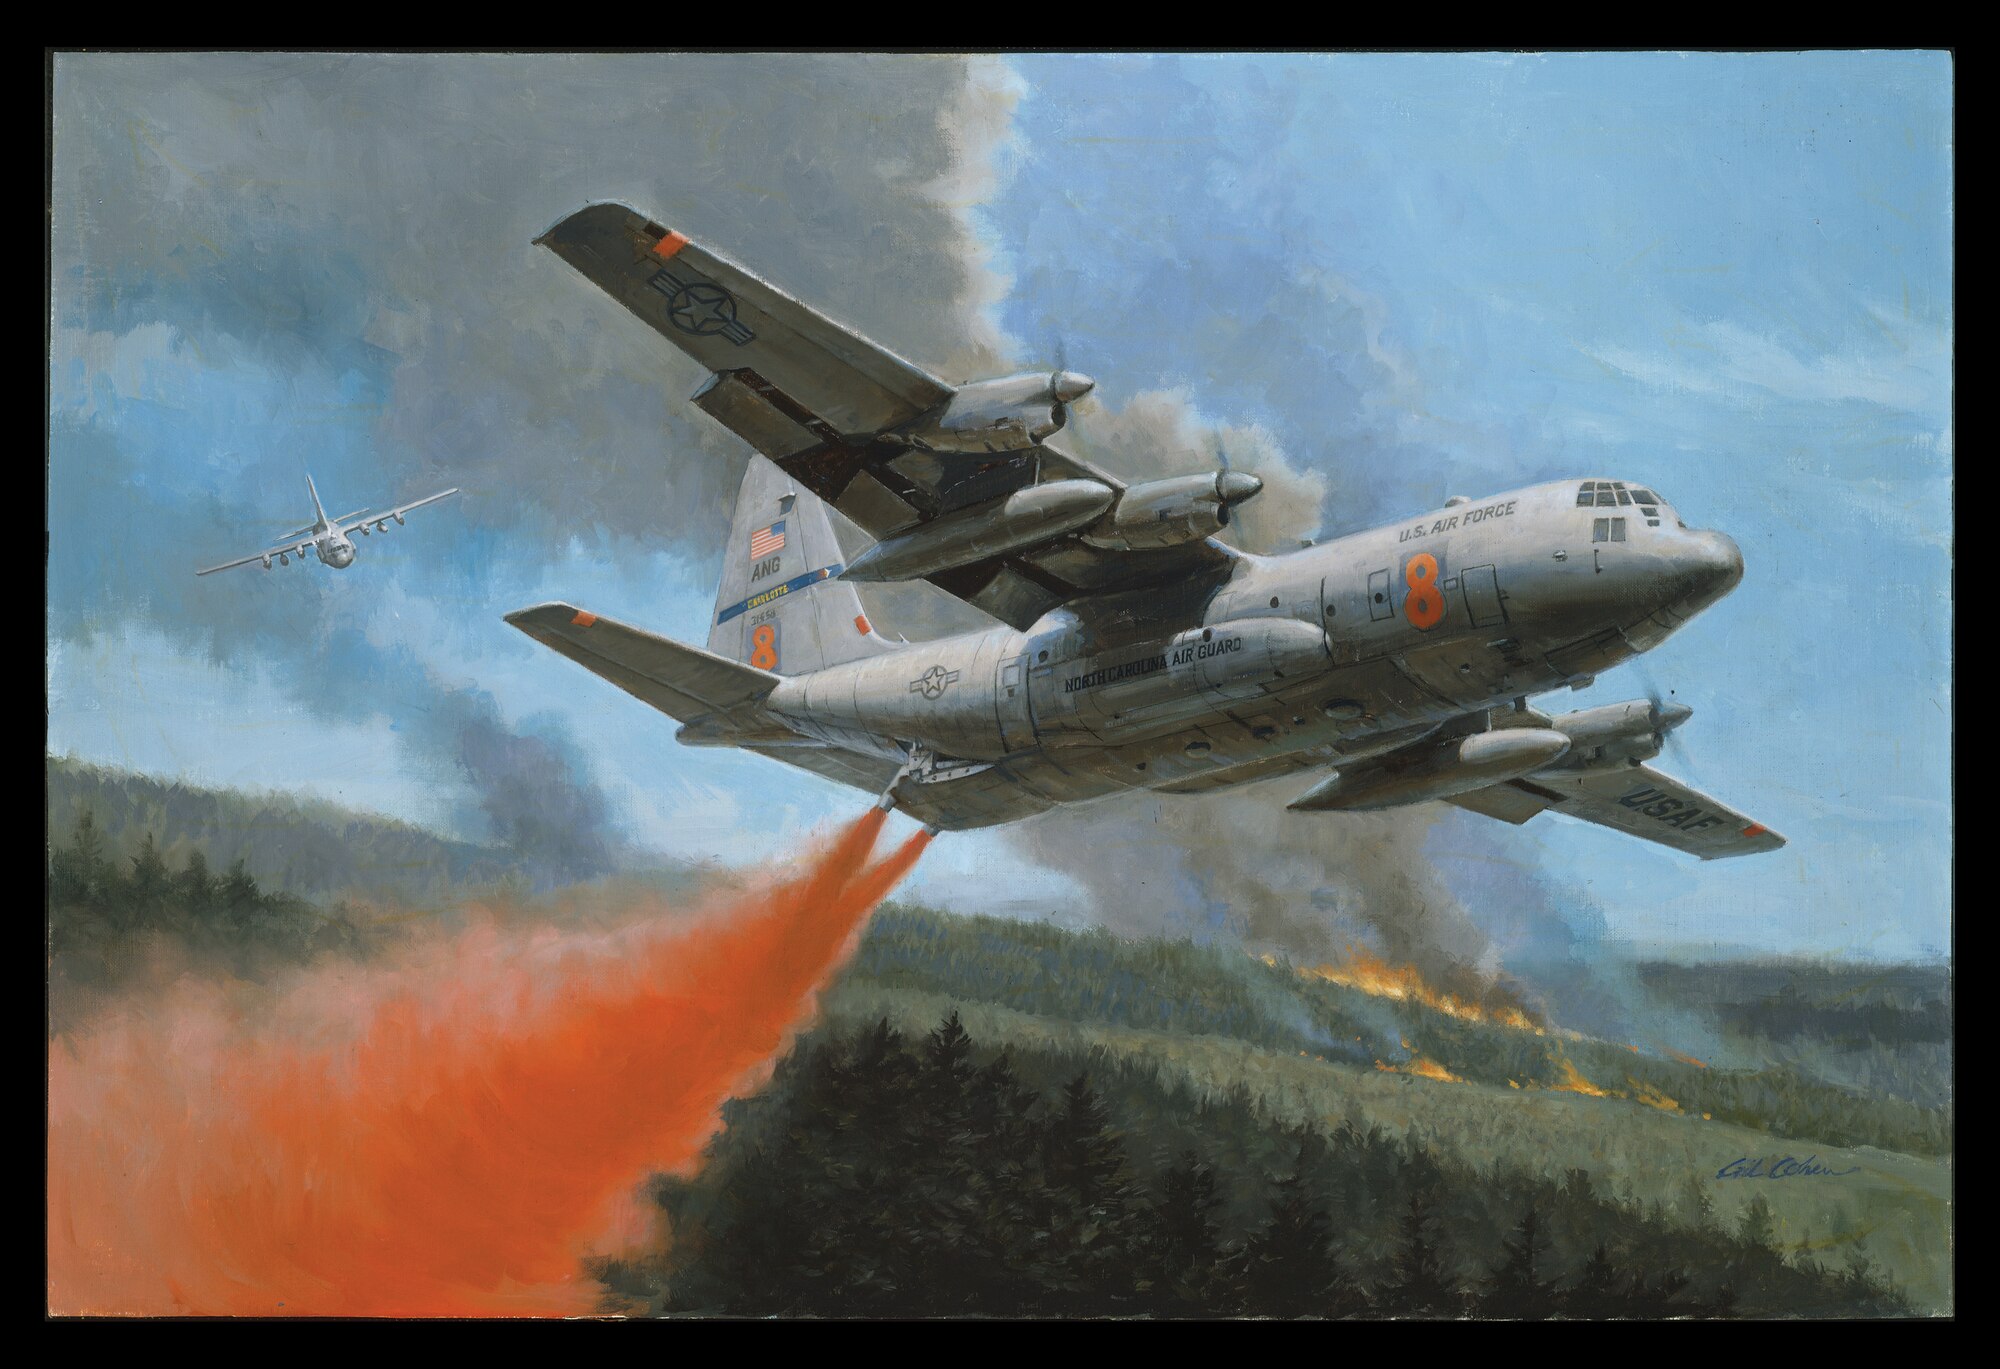 One of two Modular Airborne Firefighting System (MAFFS) equipped C-130 Hercules aircraft from the 145th Airlift Wing, North Carolina Air National Guard, lays down a blanket of flame-retardant liquid over a forested area in Southern California. The fires, stoked by 100 mph Santa Ana winds, were categorized as a major disaster. The results were more than 300,000 people driven from their homes and nearly 500,000 acres of woodlands consumed in 12 counties. Also deployed to Southern California were two MAFFS equipped C-130 s from the 153rd Airlift Wing, Wyoming Air National Guard. The four Air National Guard C-130s, staged at Naval Air Station, Point Mugu, flew more than 40 missions in the first week of operations.
The MAFFS, owned by the U.S. Forest Service, is a fire-suppressant apparatus that is loaded into the C-130’s cargo area. Consisting of a series of five pressurized tanks, the MAFFS can hold 3,000 gallons of flame-retardant liquid that is dropped along the leading edge of a fire to block the spread of flames. Flown on Air National Guard and Air Force Reserve C-130 aircraft, the aircrews require special training to fly these civil support missions. MAFFS crews are buffeted by thermal gusts, wind, and smoke as they drop their payload while flying between 150 and 200 feet above the ground.
Since 1974, the MAFFS has saved land, lives, and property from wildfires in the U.S. and abroad. Currently there are three Air National Guard C-130 units capable of operating MAFFS. In addition to the 145th AW and the 153rd AW, the 146th AW, California Air National Guard, also flies MAFFS-equipped C-130s. These units continue to stand at the ready to support civil emergencies.  
This work of art “Quenching the Flames” was painted by renowned Aviation Artist, Gil Cohen.
To see how to download or order a print, go to:
http://www.ng.mil/resources/photo_gallery/index.html
